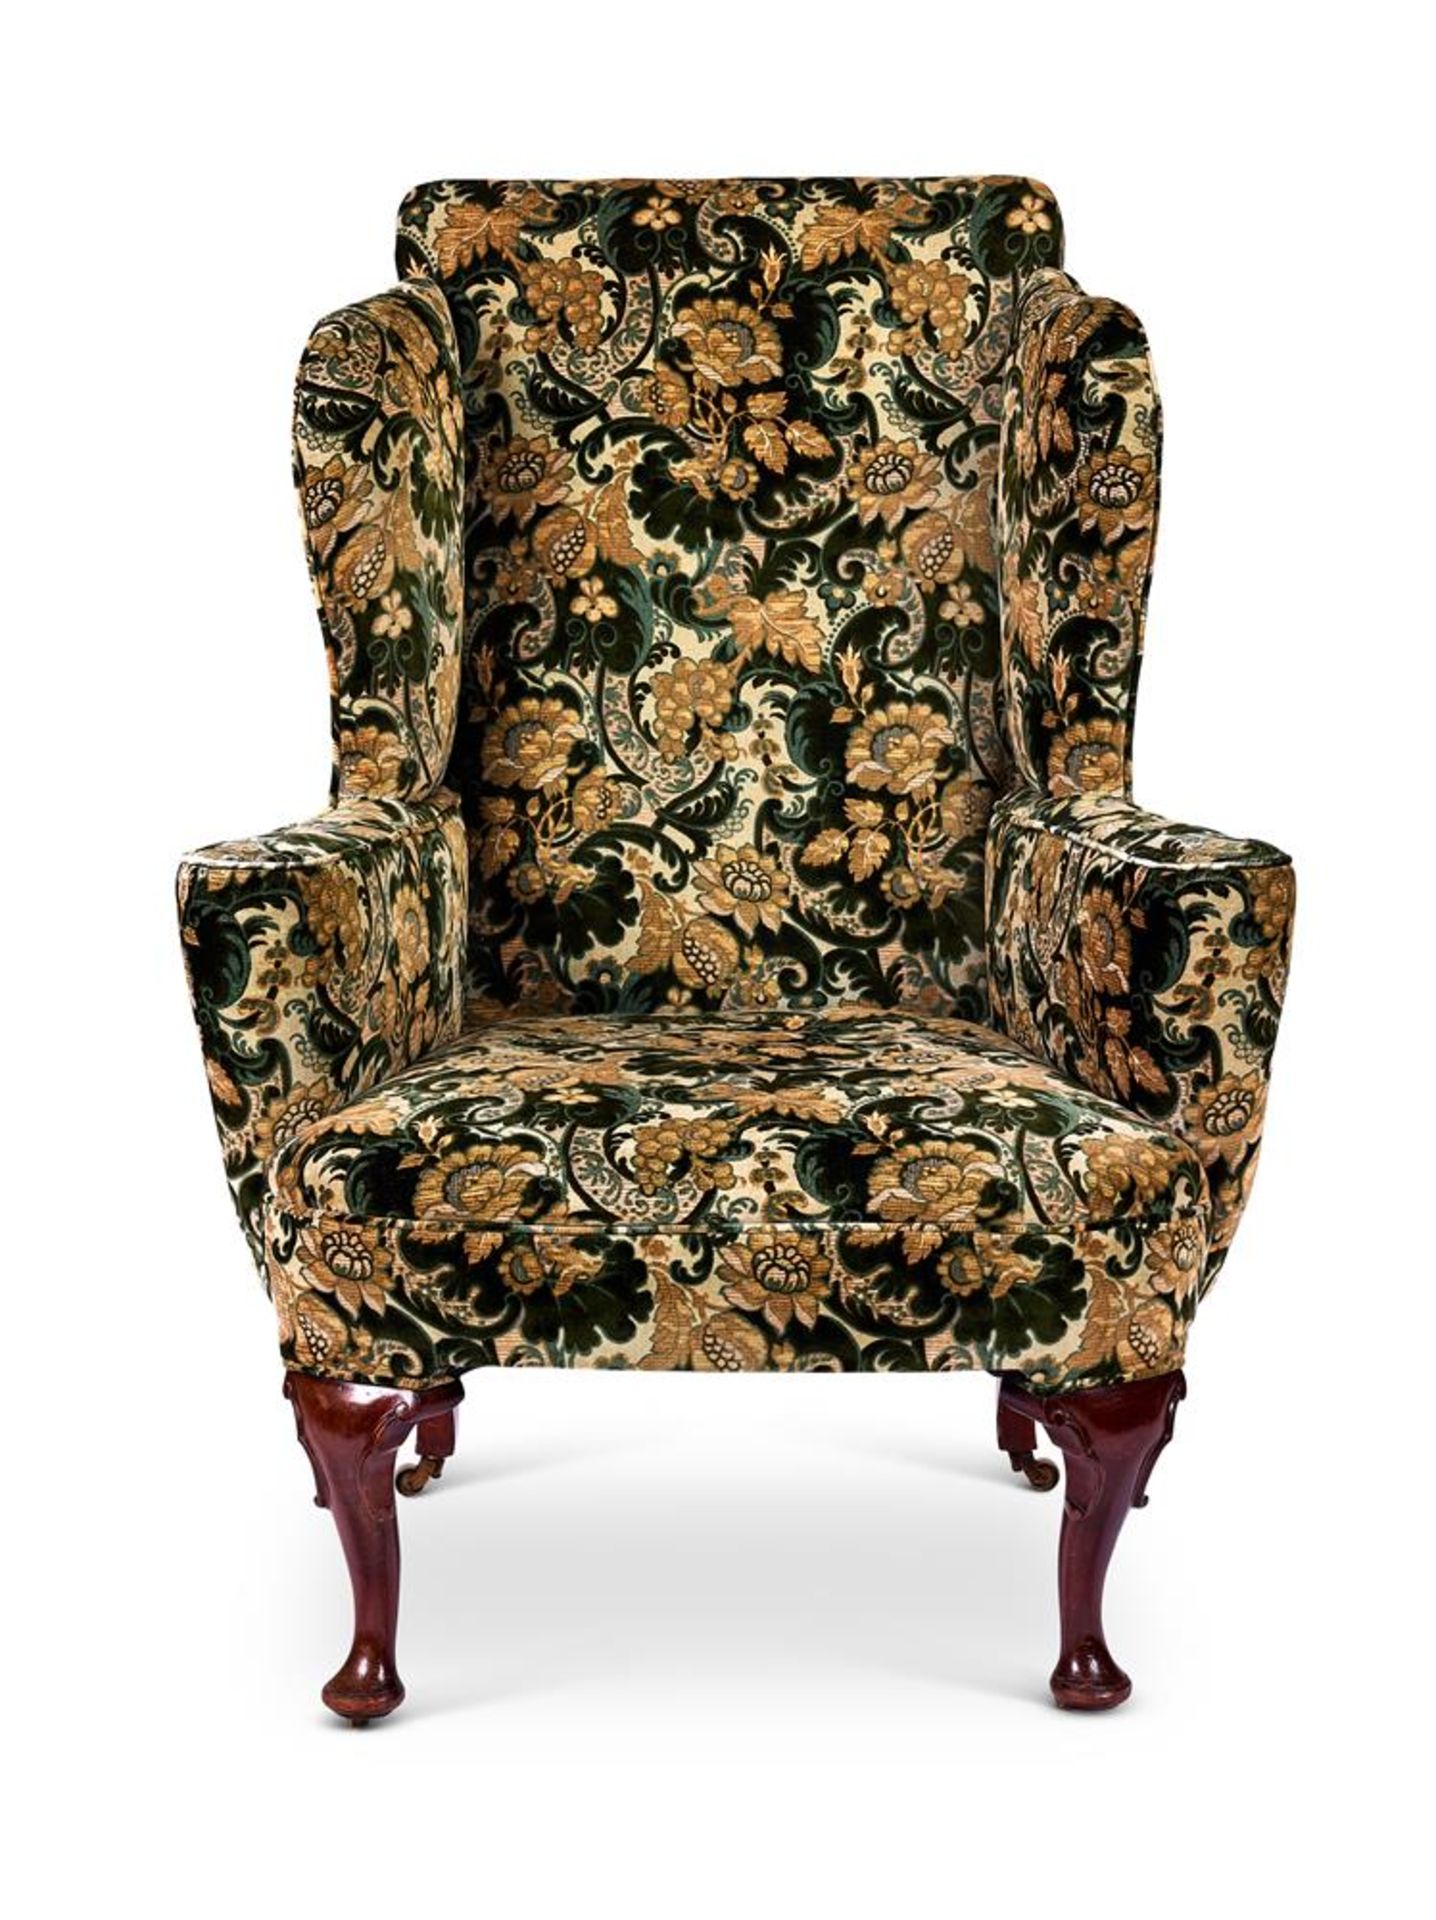 A WALNUT AND FLORAL TAPESTRY UPHOLSTERED WING ARMCHAIR OF GEORGE I STYLE - Image 2 of 3